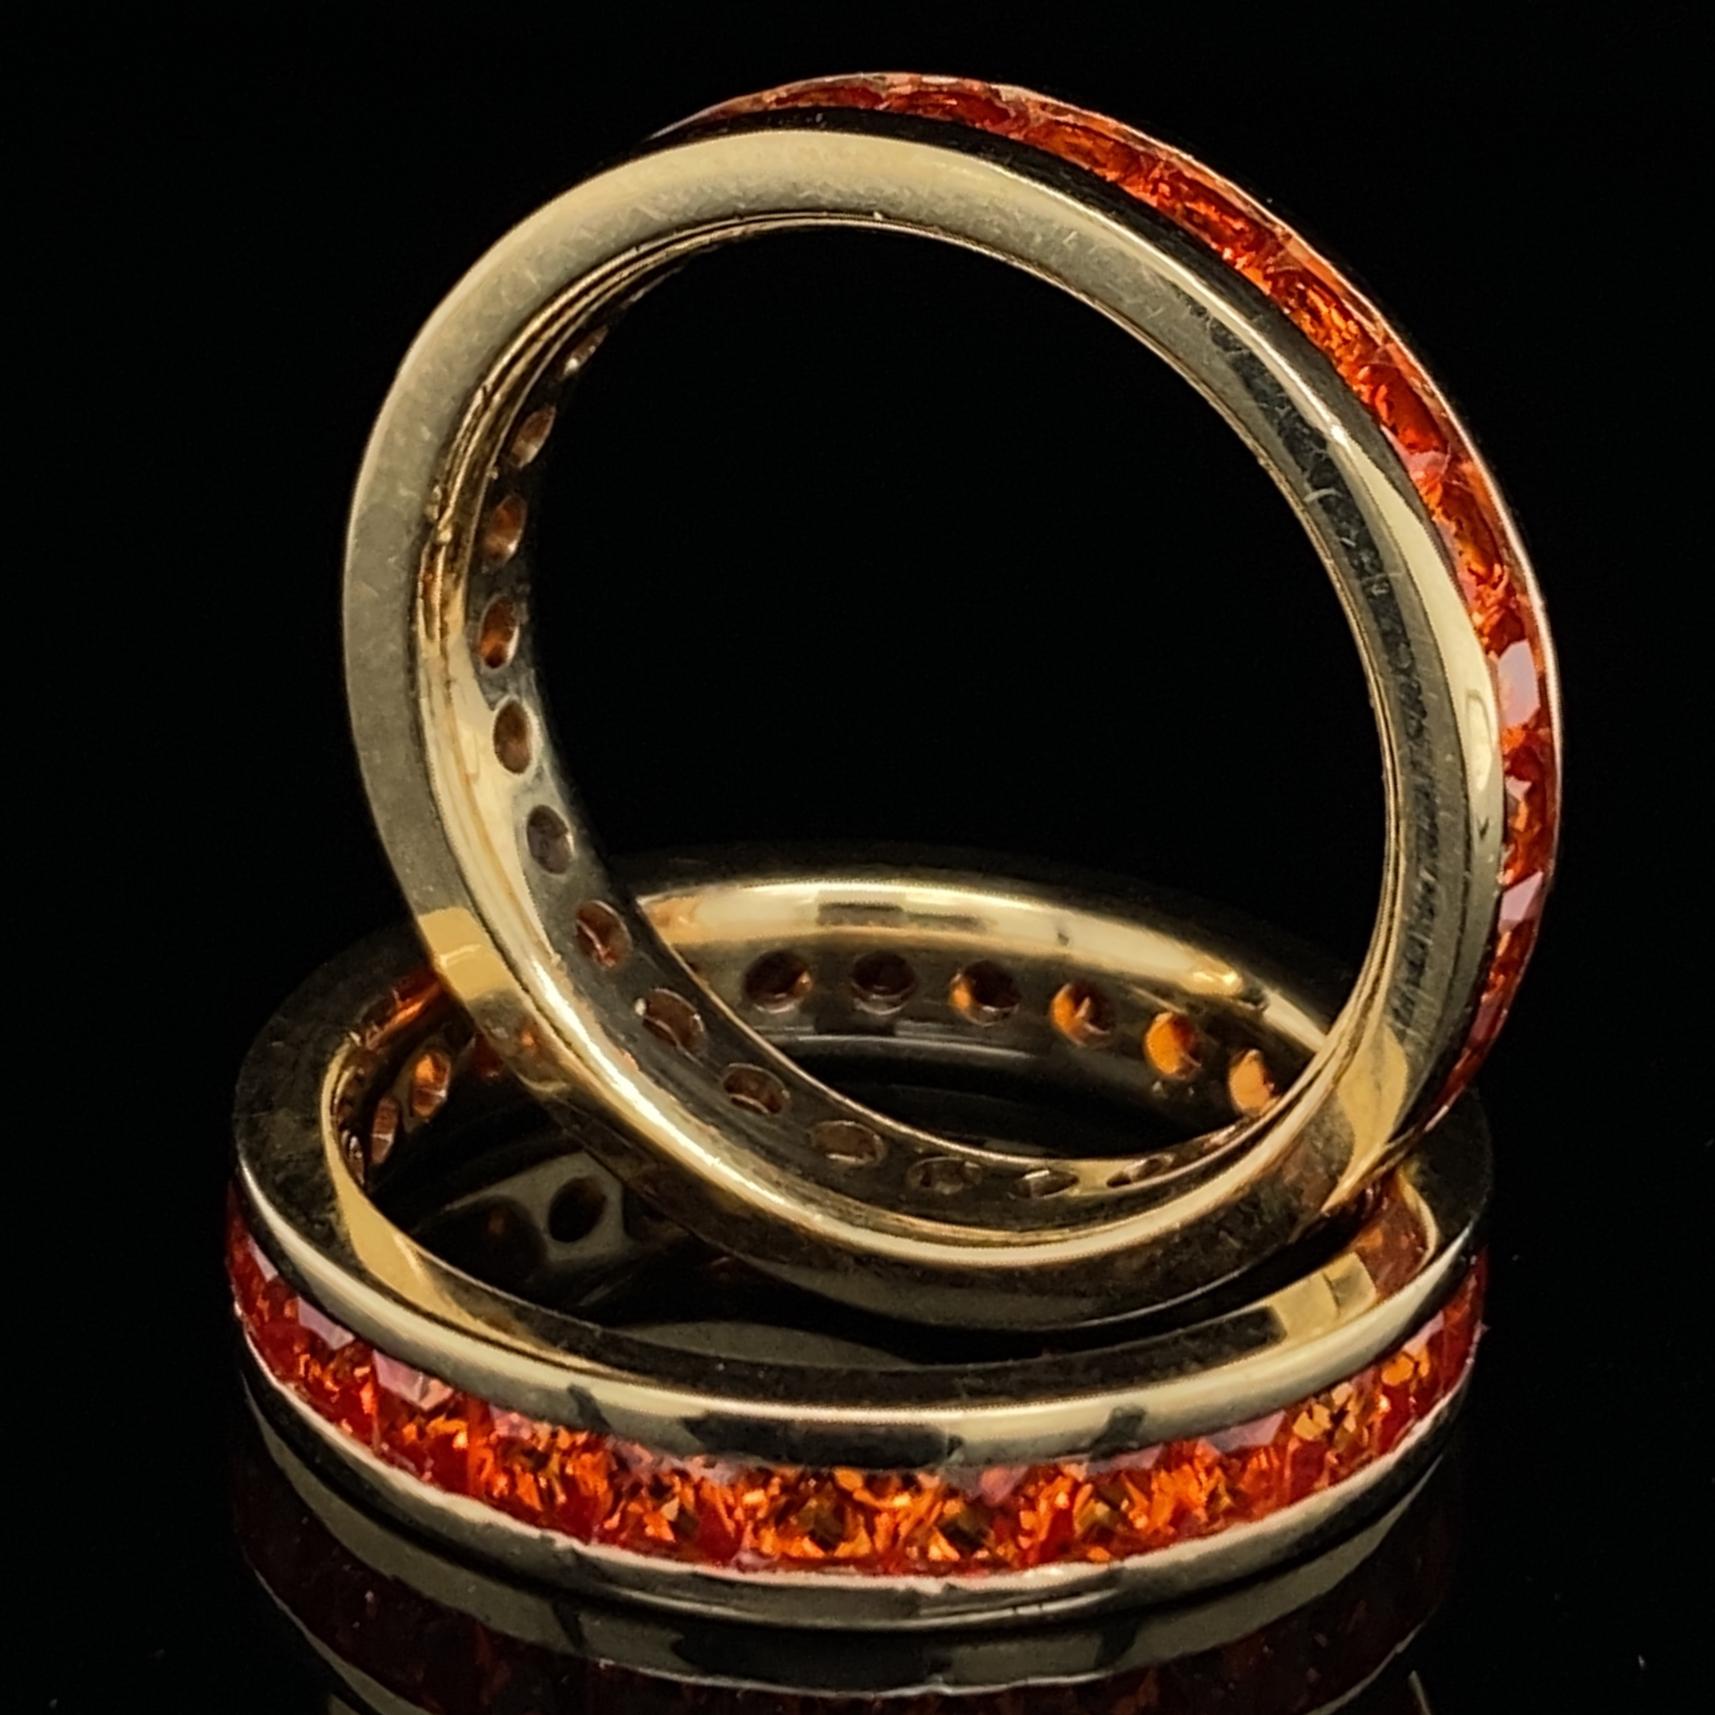 Eytan Brandes presents a versatile and intensely colorful pair of orange sapphire eternity rings.

Instead of round stones, Eytan chose squares with a cut similar to diamond princess cuts.  Square stones are a great choice for channel-set eternity